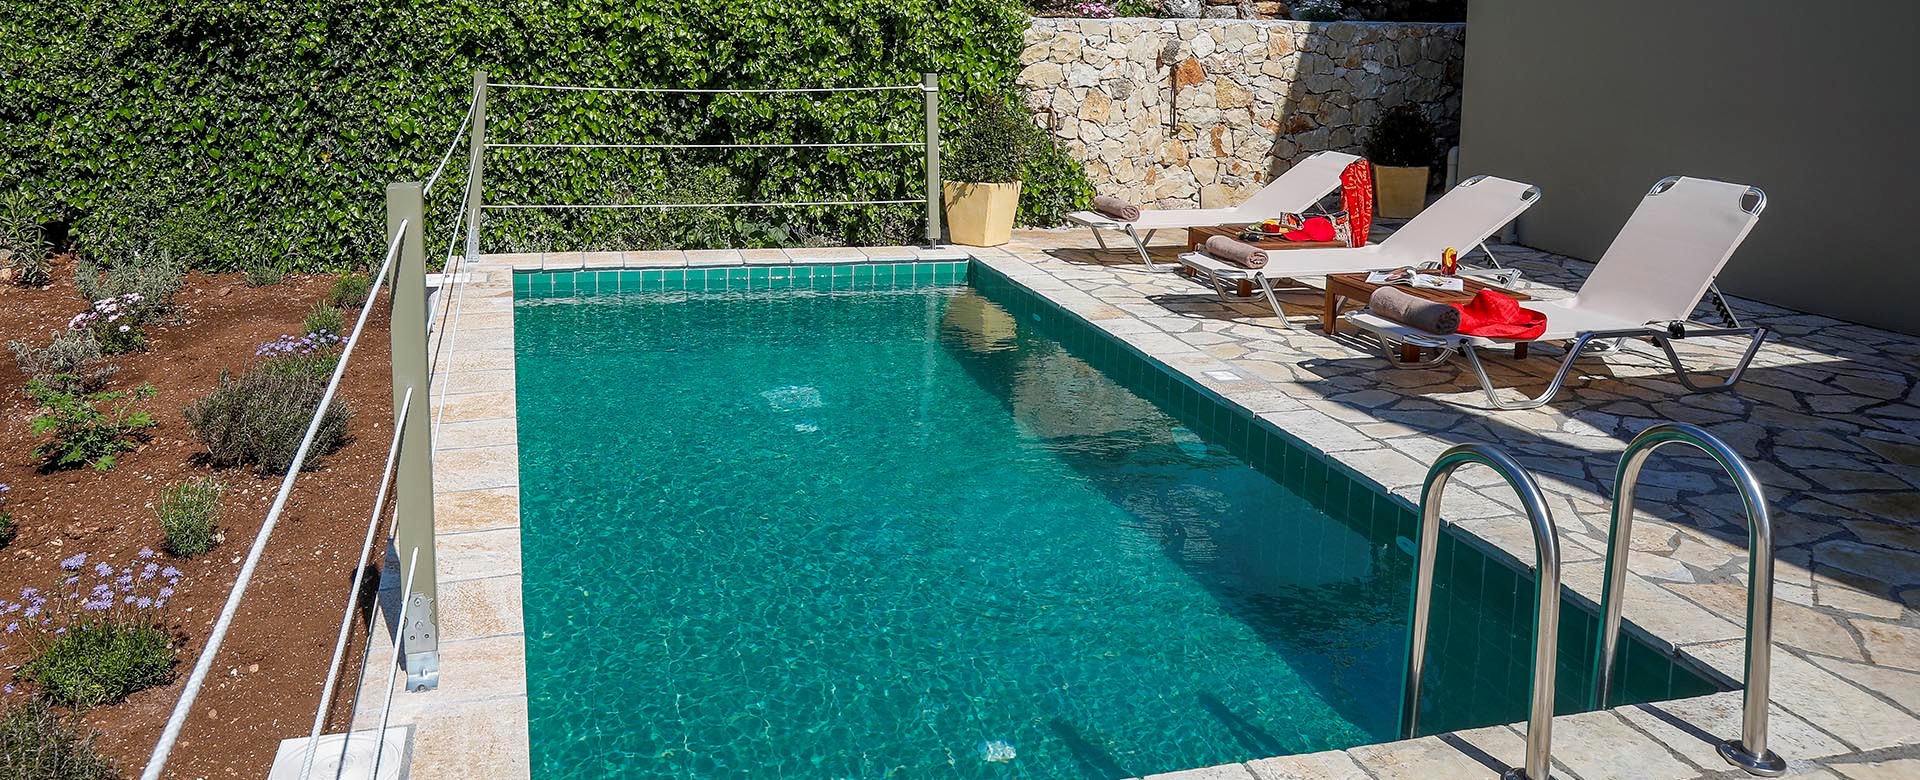 Private sunny pool deck with plunge pool at Rosie's Herb Cottage, Assos, Kefalonia, Greek Islands